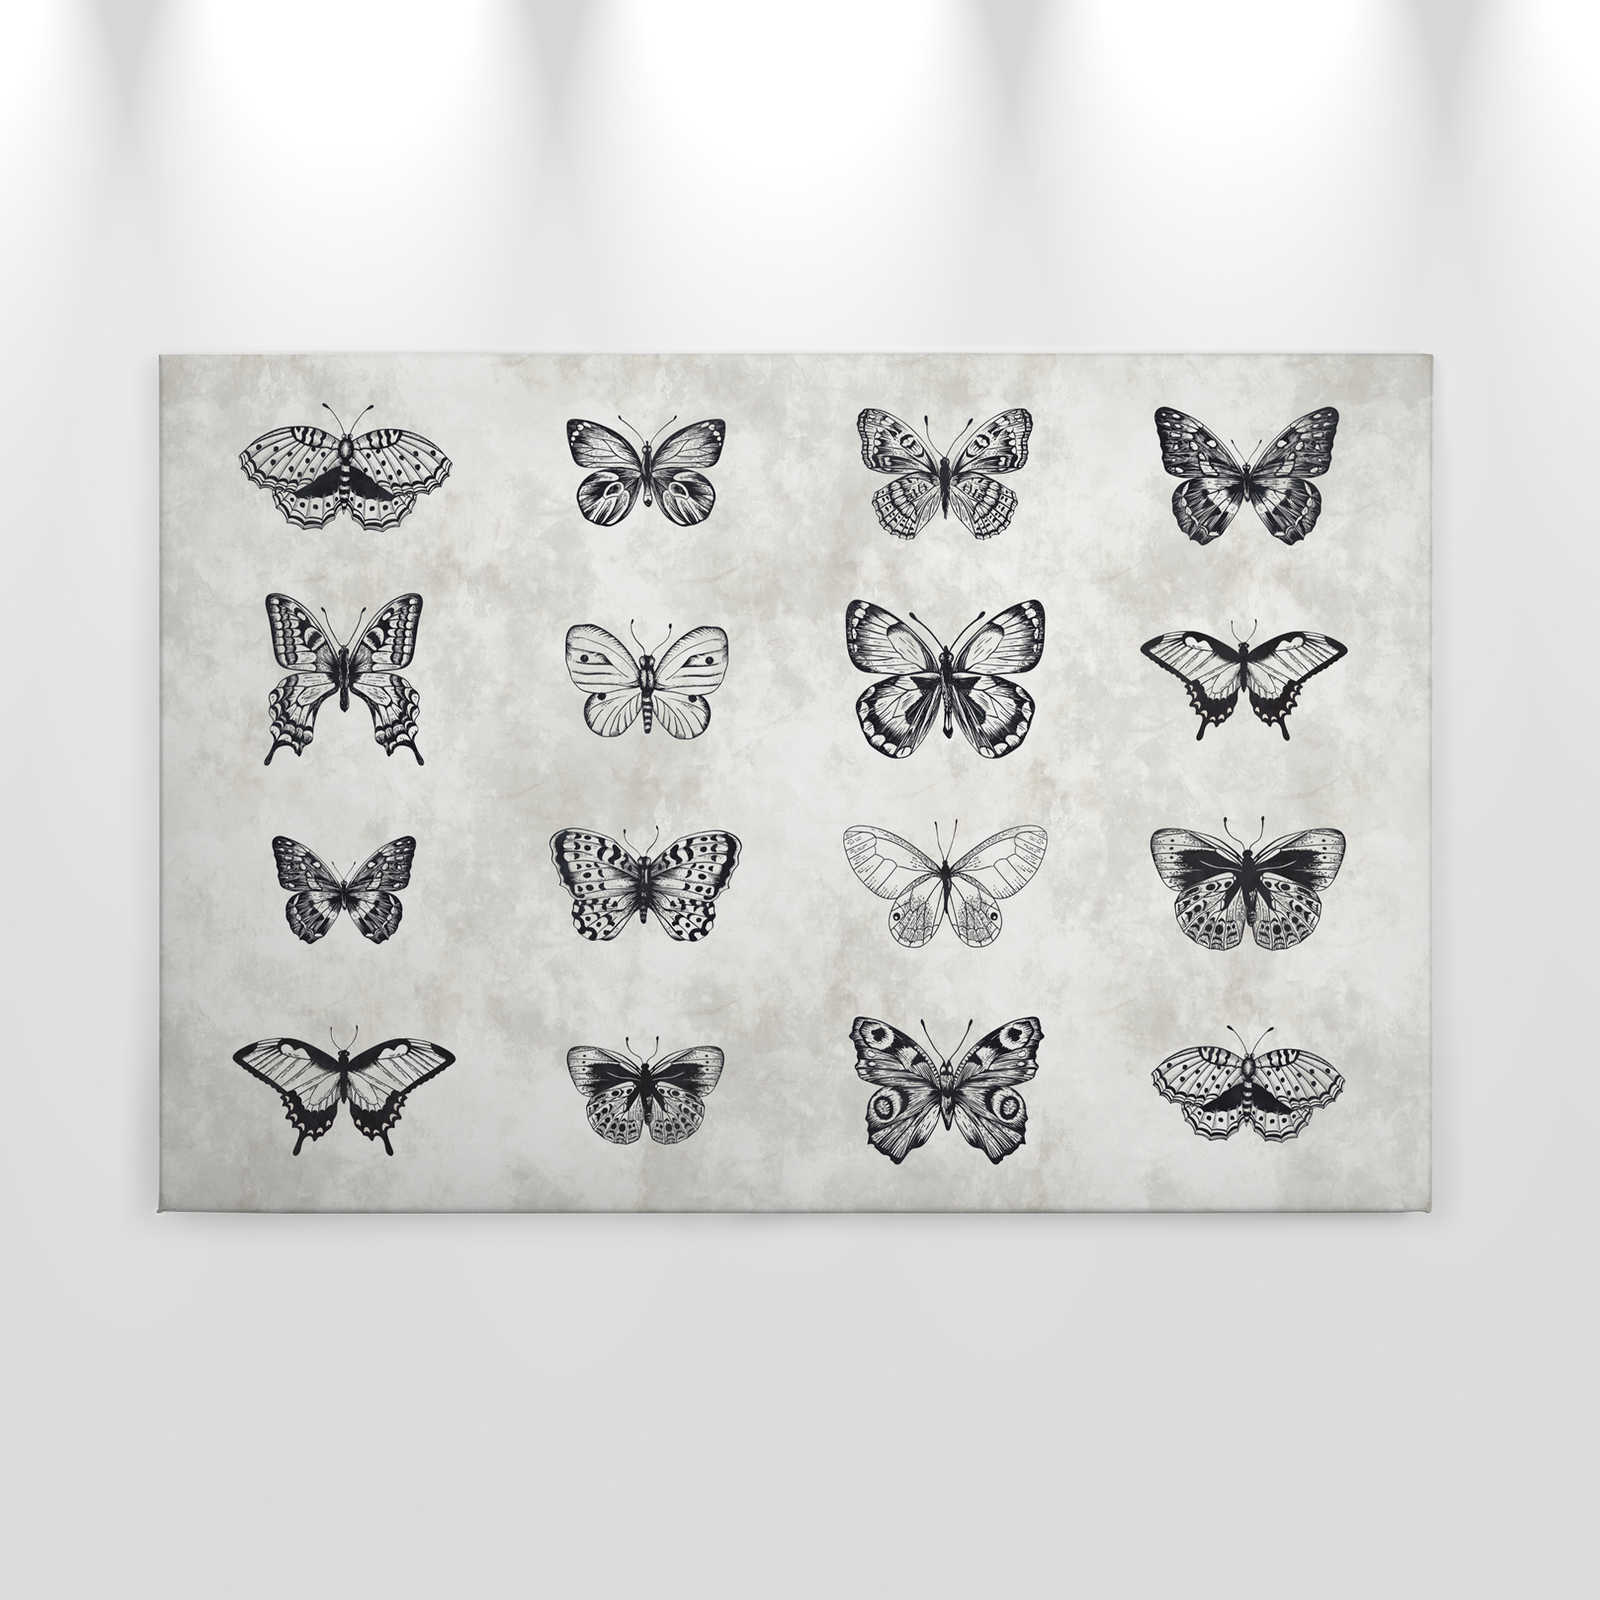             Butterfly Canvas Painting Black & White Drawings - 0.90 m x 0.60 m
        